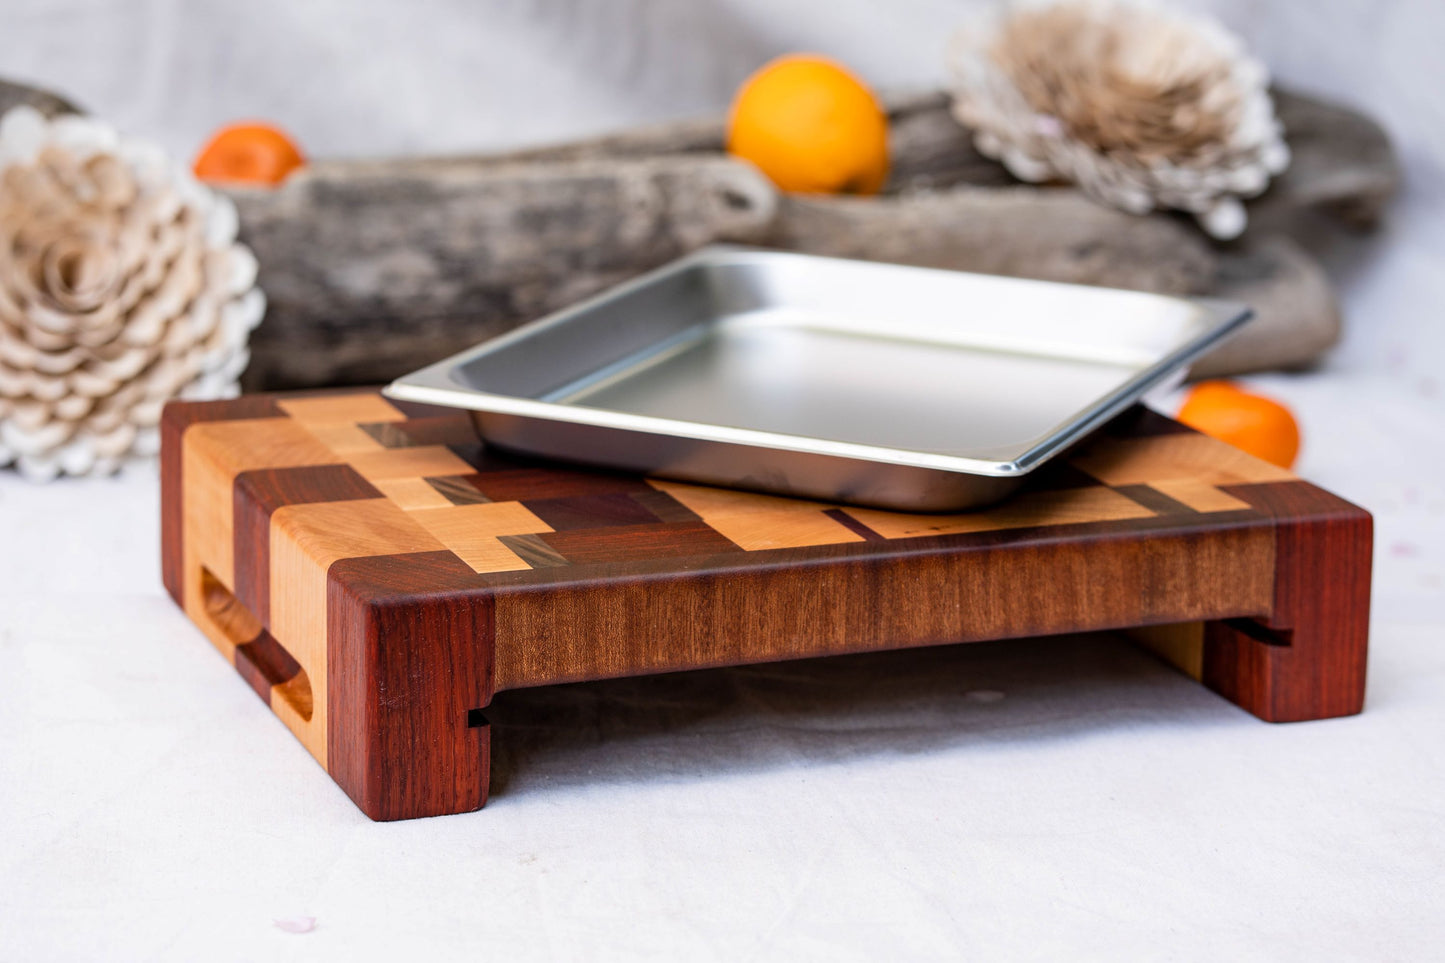 Pattern Cutting Board with Tray